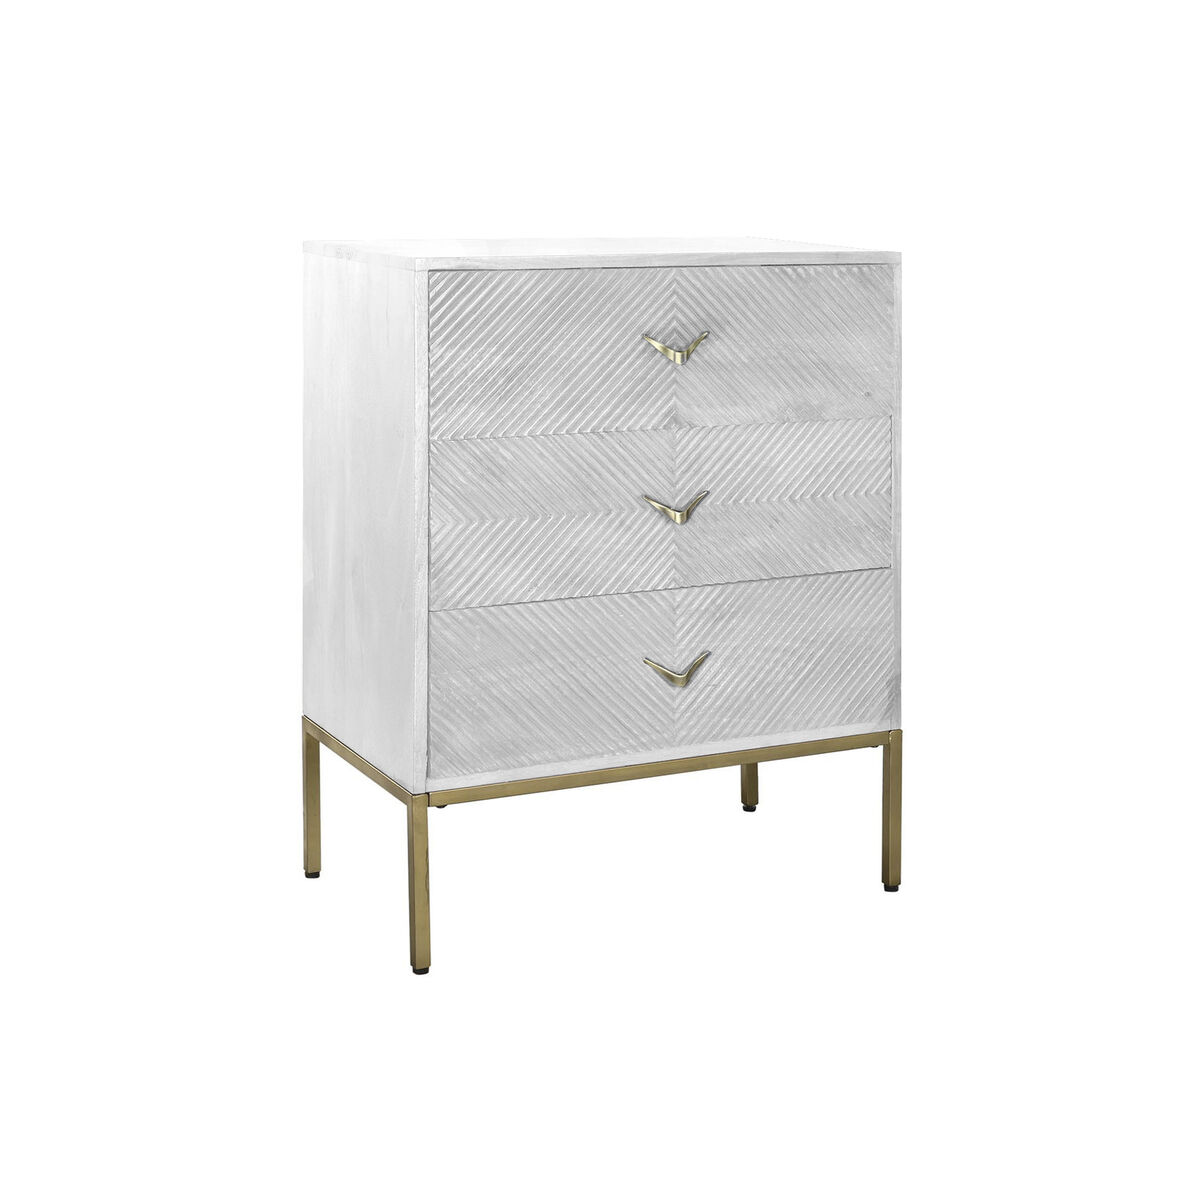 Chest of drawers DKD Home Decor Metal White Mango wood 70 x 40 x 90 cm